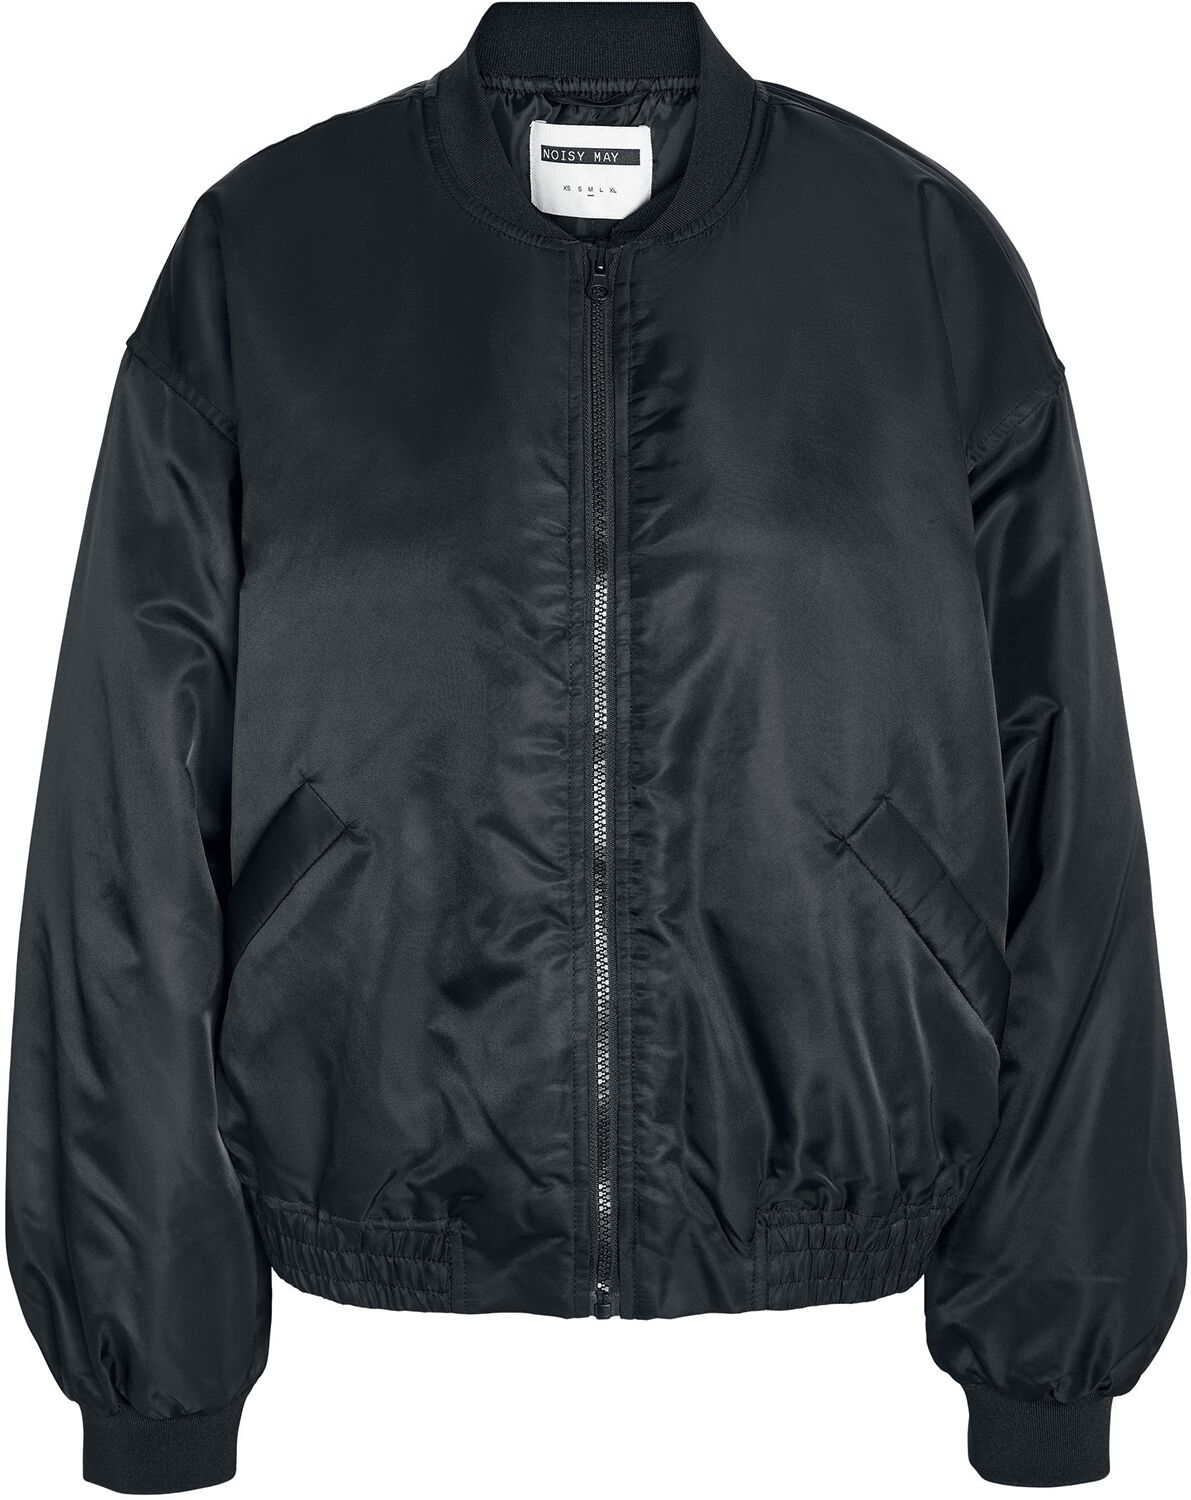 Image of Giacca Bomber di Noisy May - NMJustine padded bomber jacket - XS a M - Donna - nero